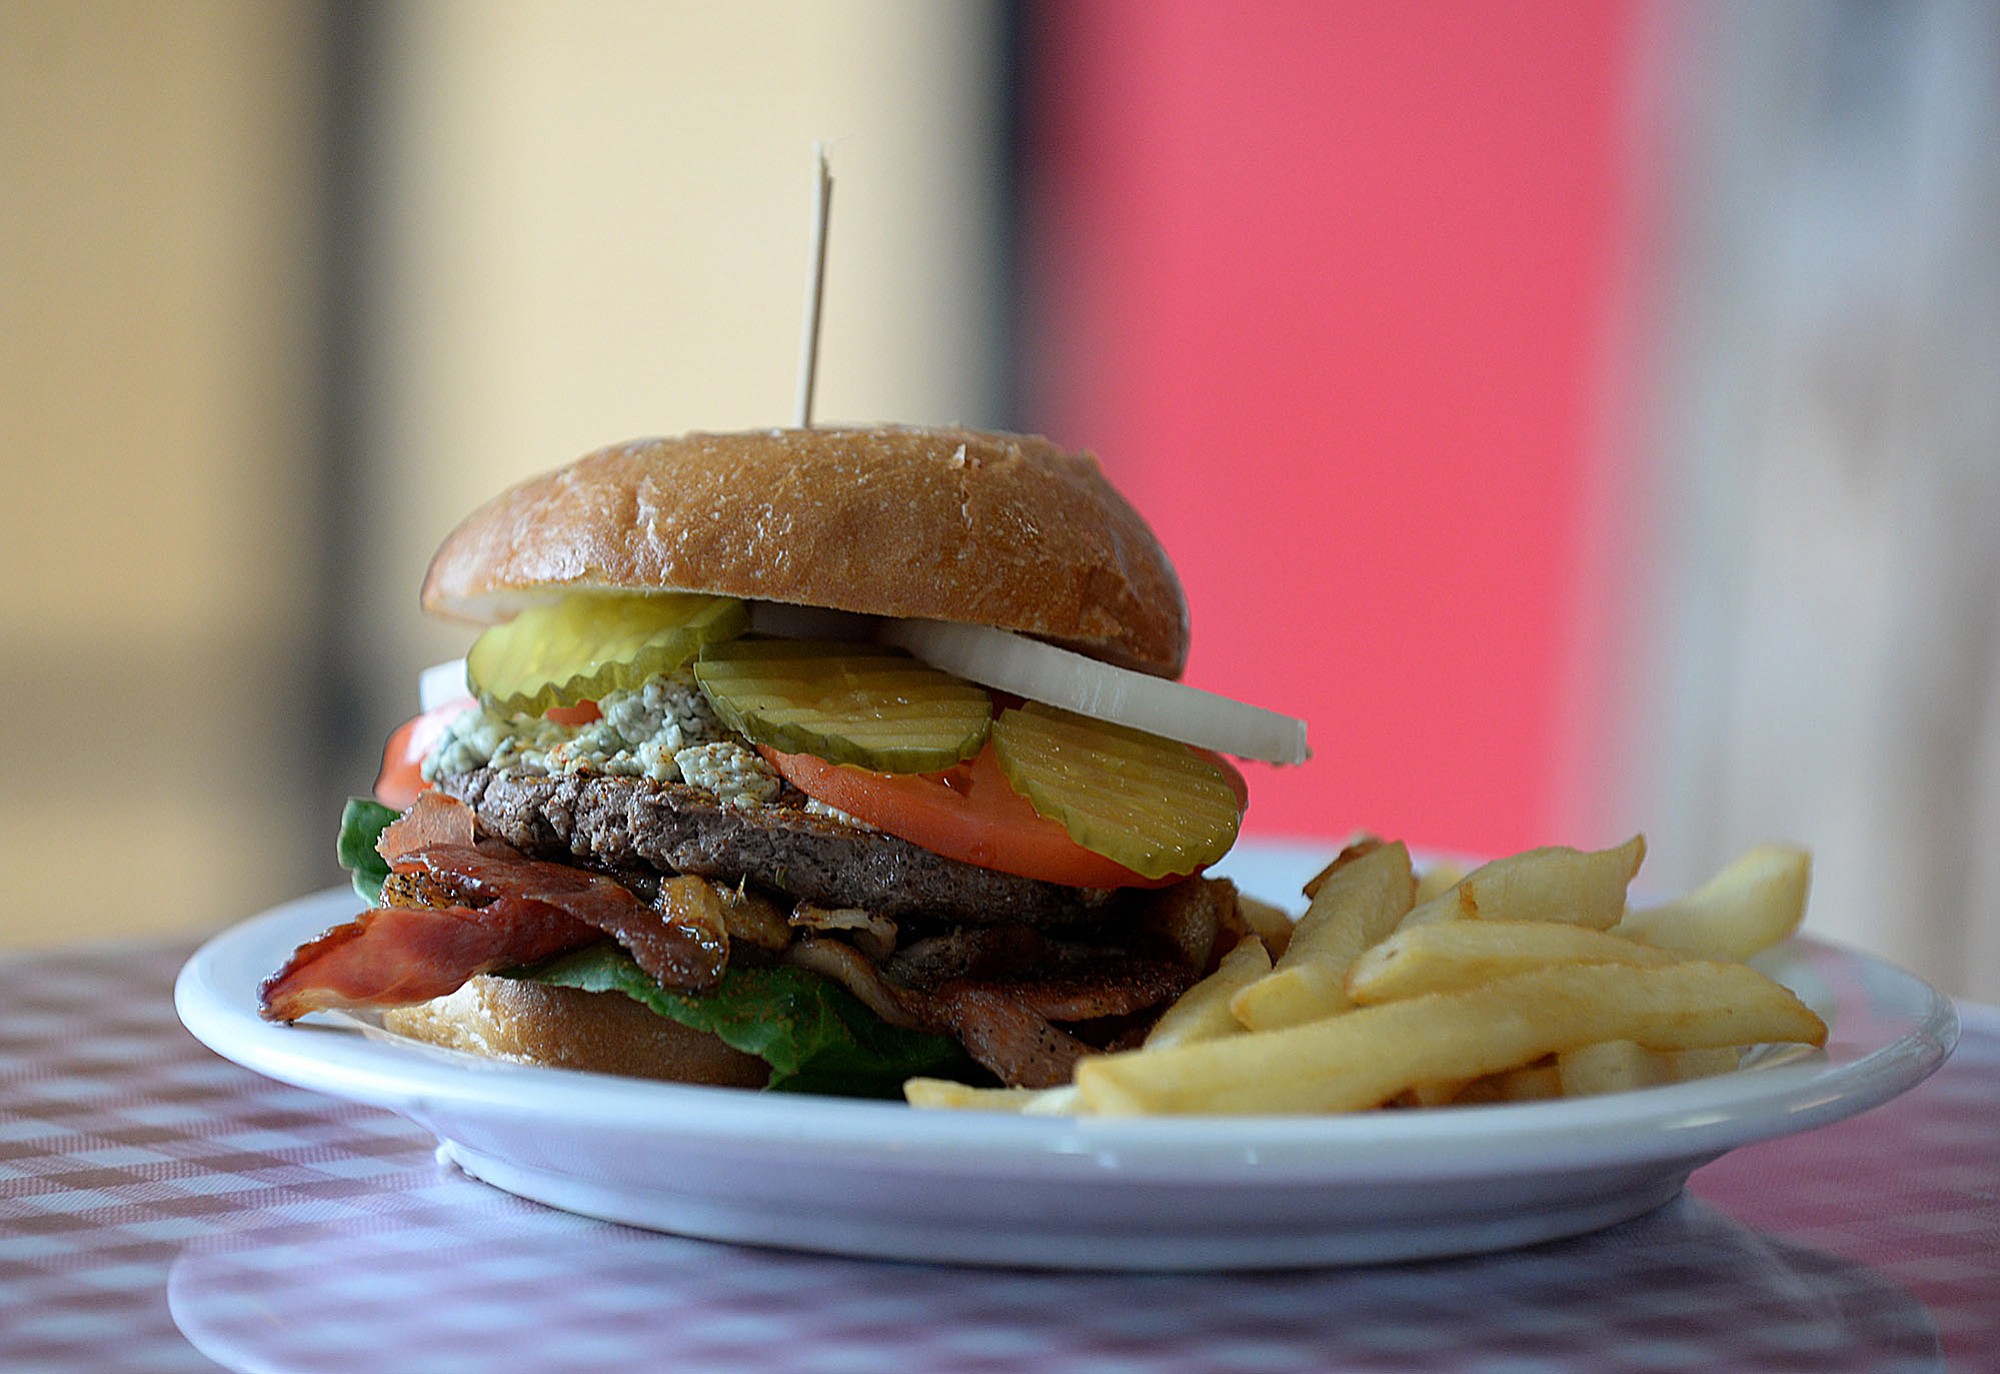 The blue cheese burger is served with fries Aug.